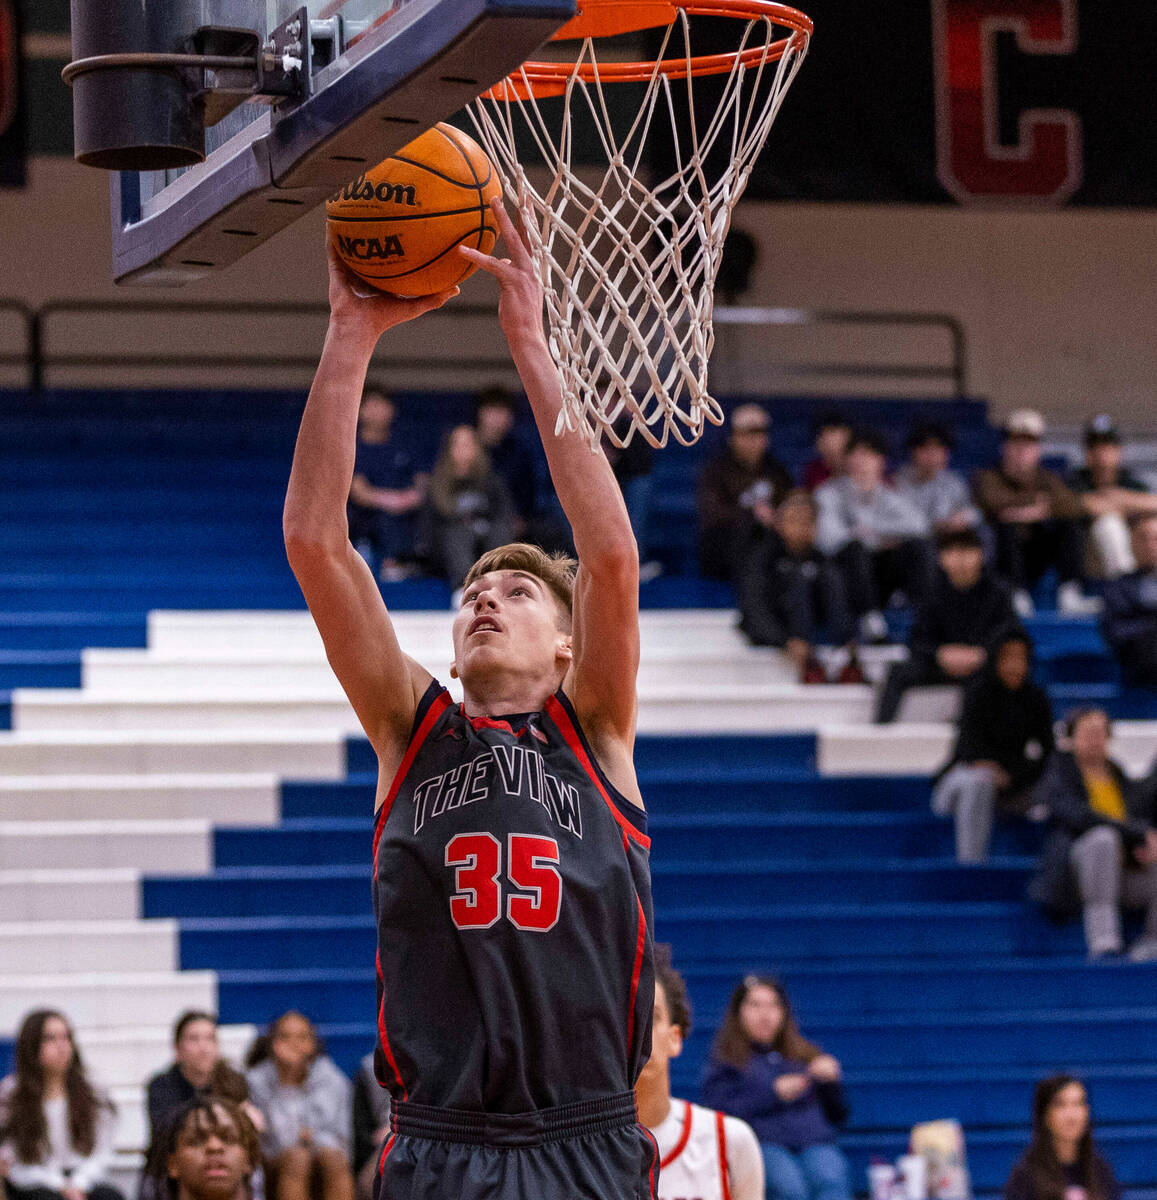 Arbor View's Wyatt Jaeck (35) lays up the ball against Coronado during the first half of their ...